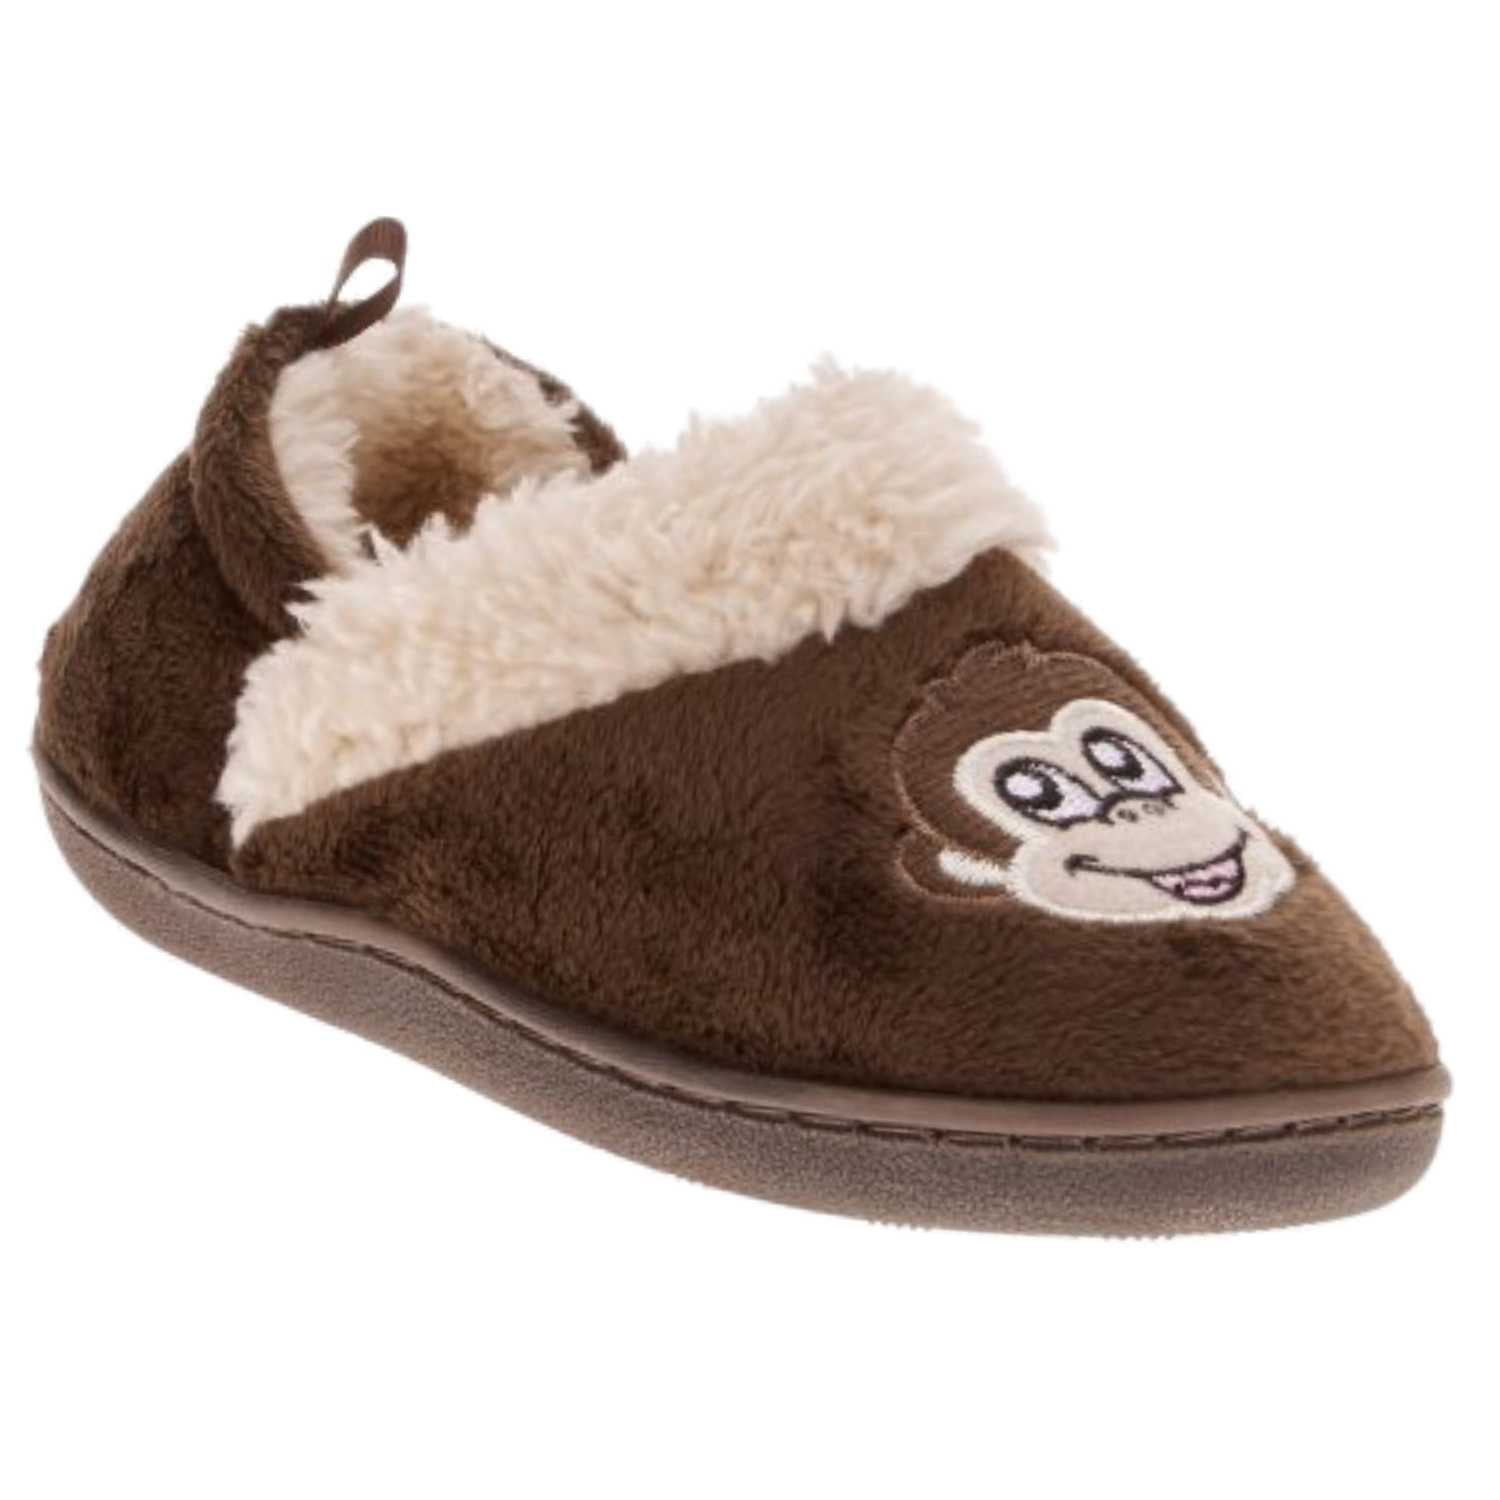 Walmart Brand Infant Toddler Boys Canvas Slip On Shoes Brown Monkey Size 5 NEW